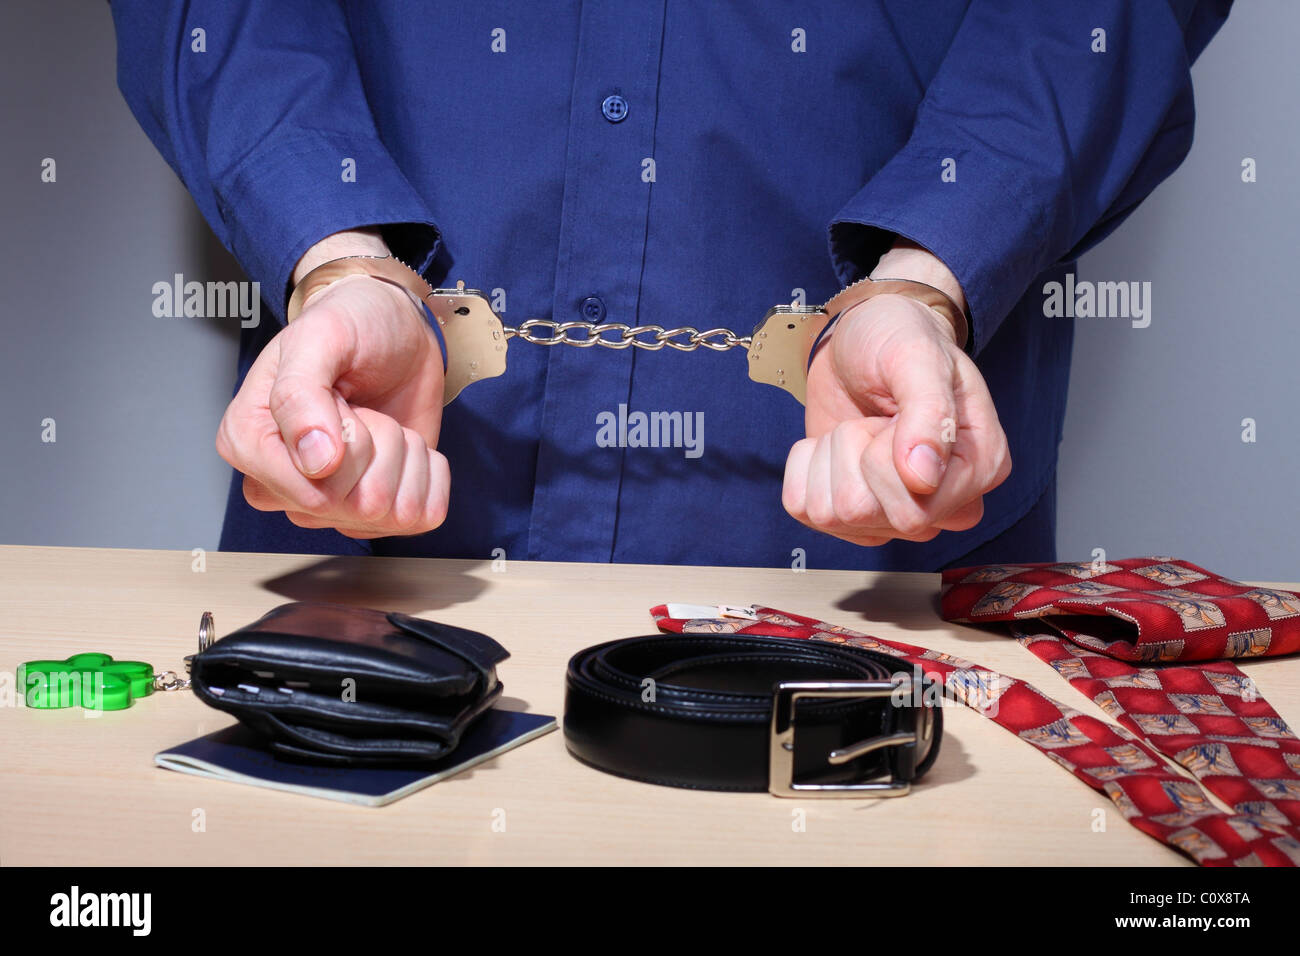 Businessman with handcuffs, stripped of personal items during arrest Stock Photo